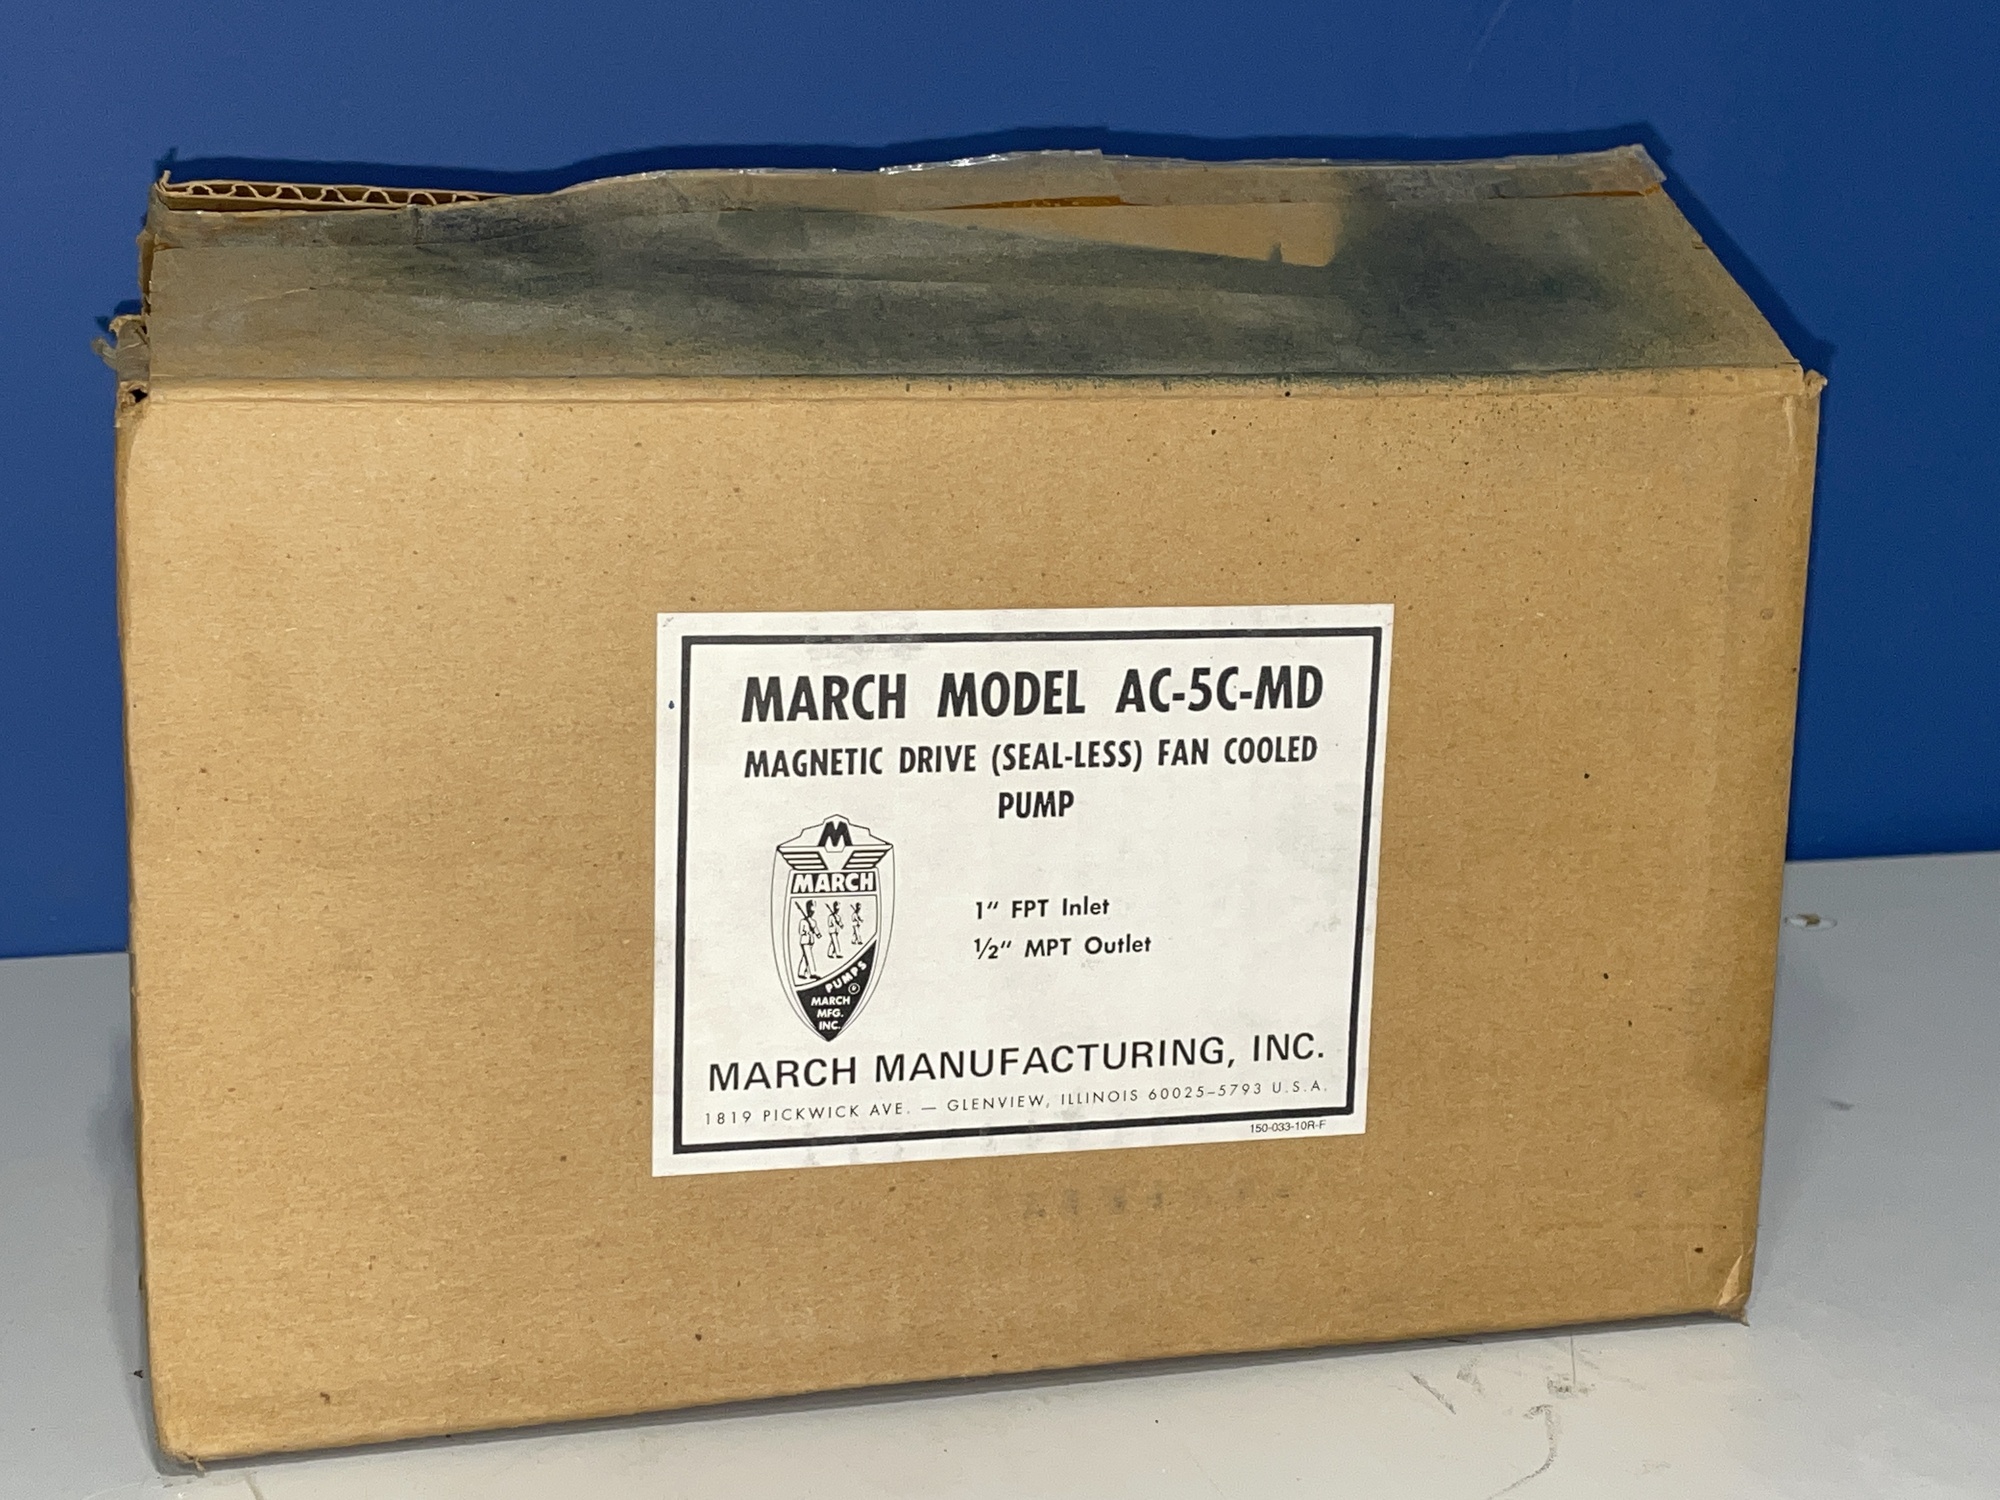 MARCH AC-5C-MD Coolant Systems, Pumps | New England Industrial Machinery